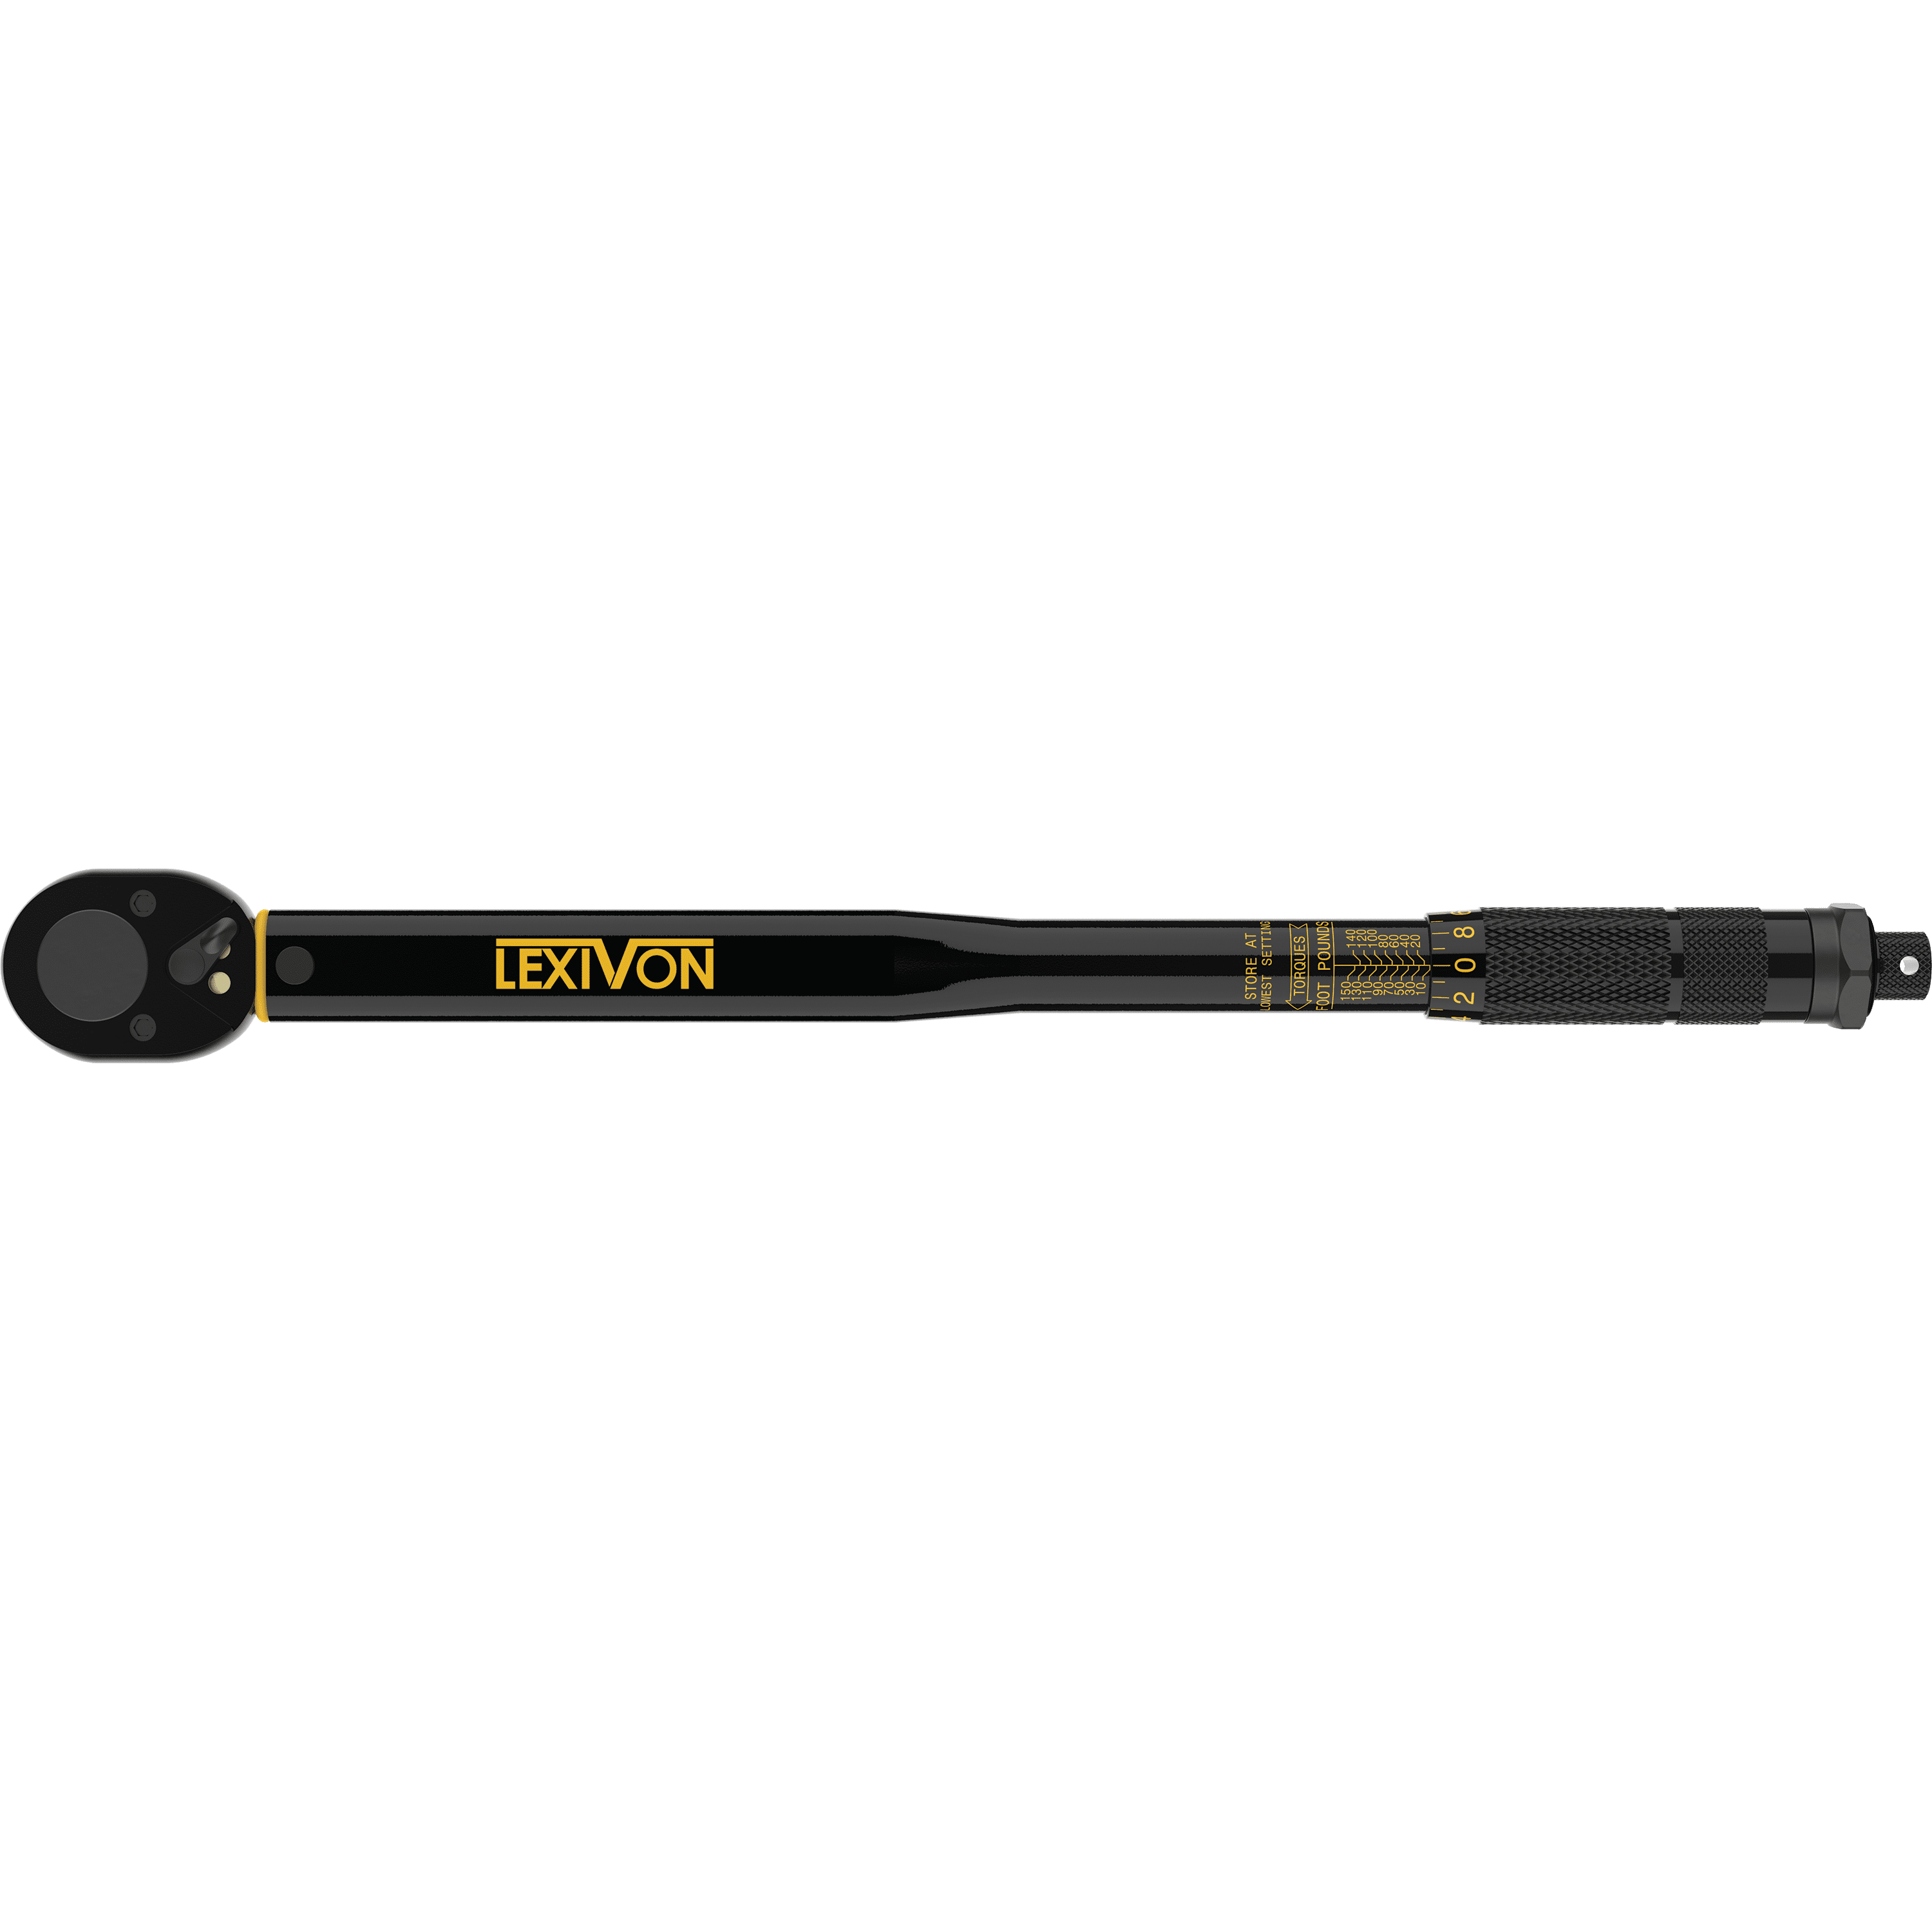 UYECOVE 1/2 Drive Torque Wrench, 10-150FT-LB/13.6-203.4Nm Industrial Grade,  Dual Range Scale, Blue